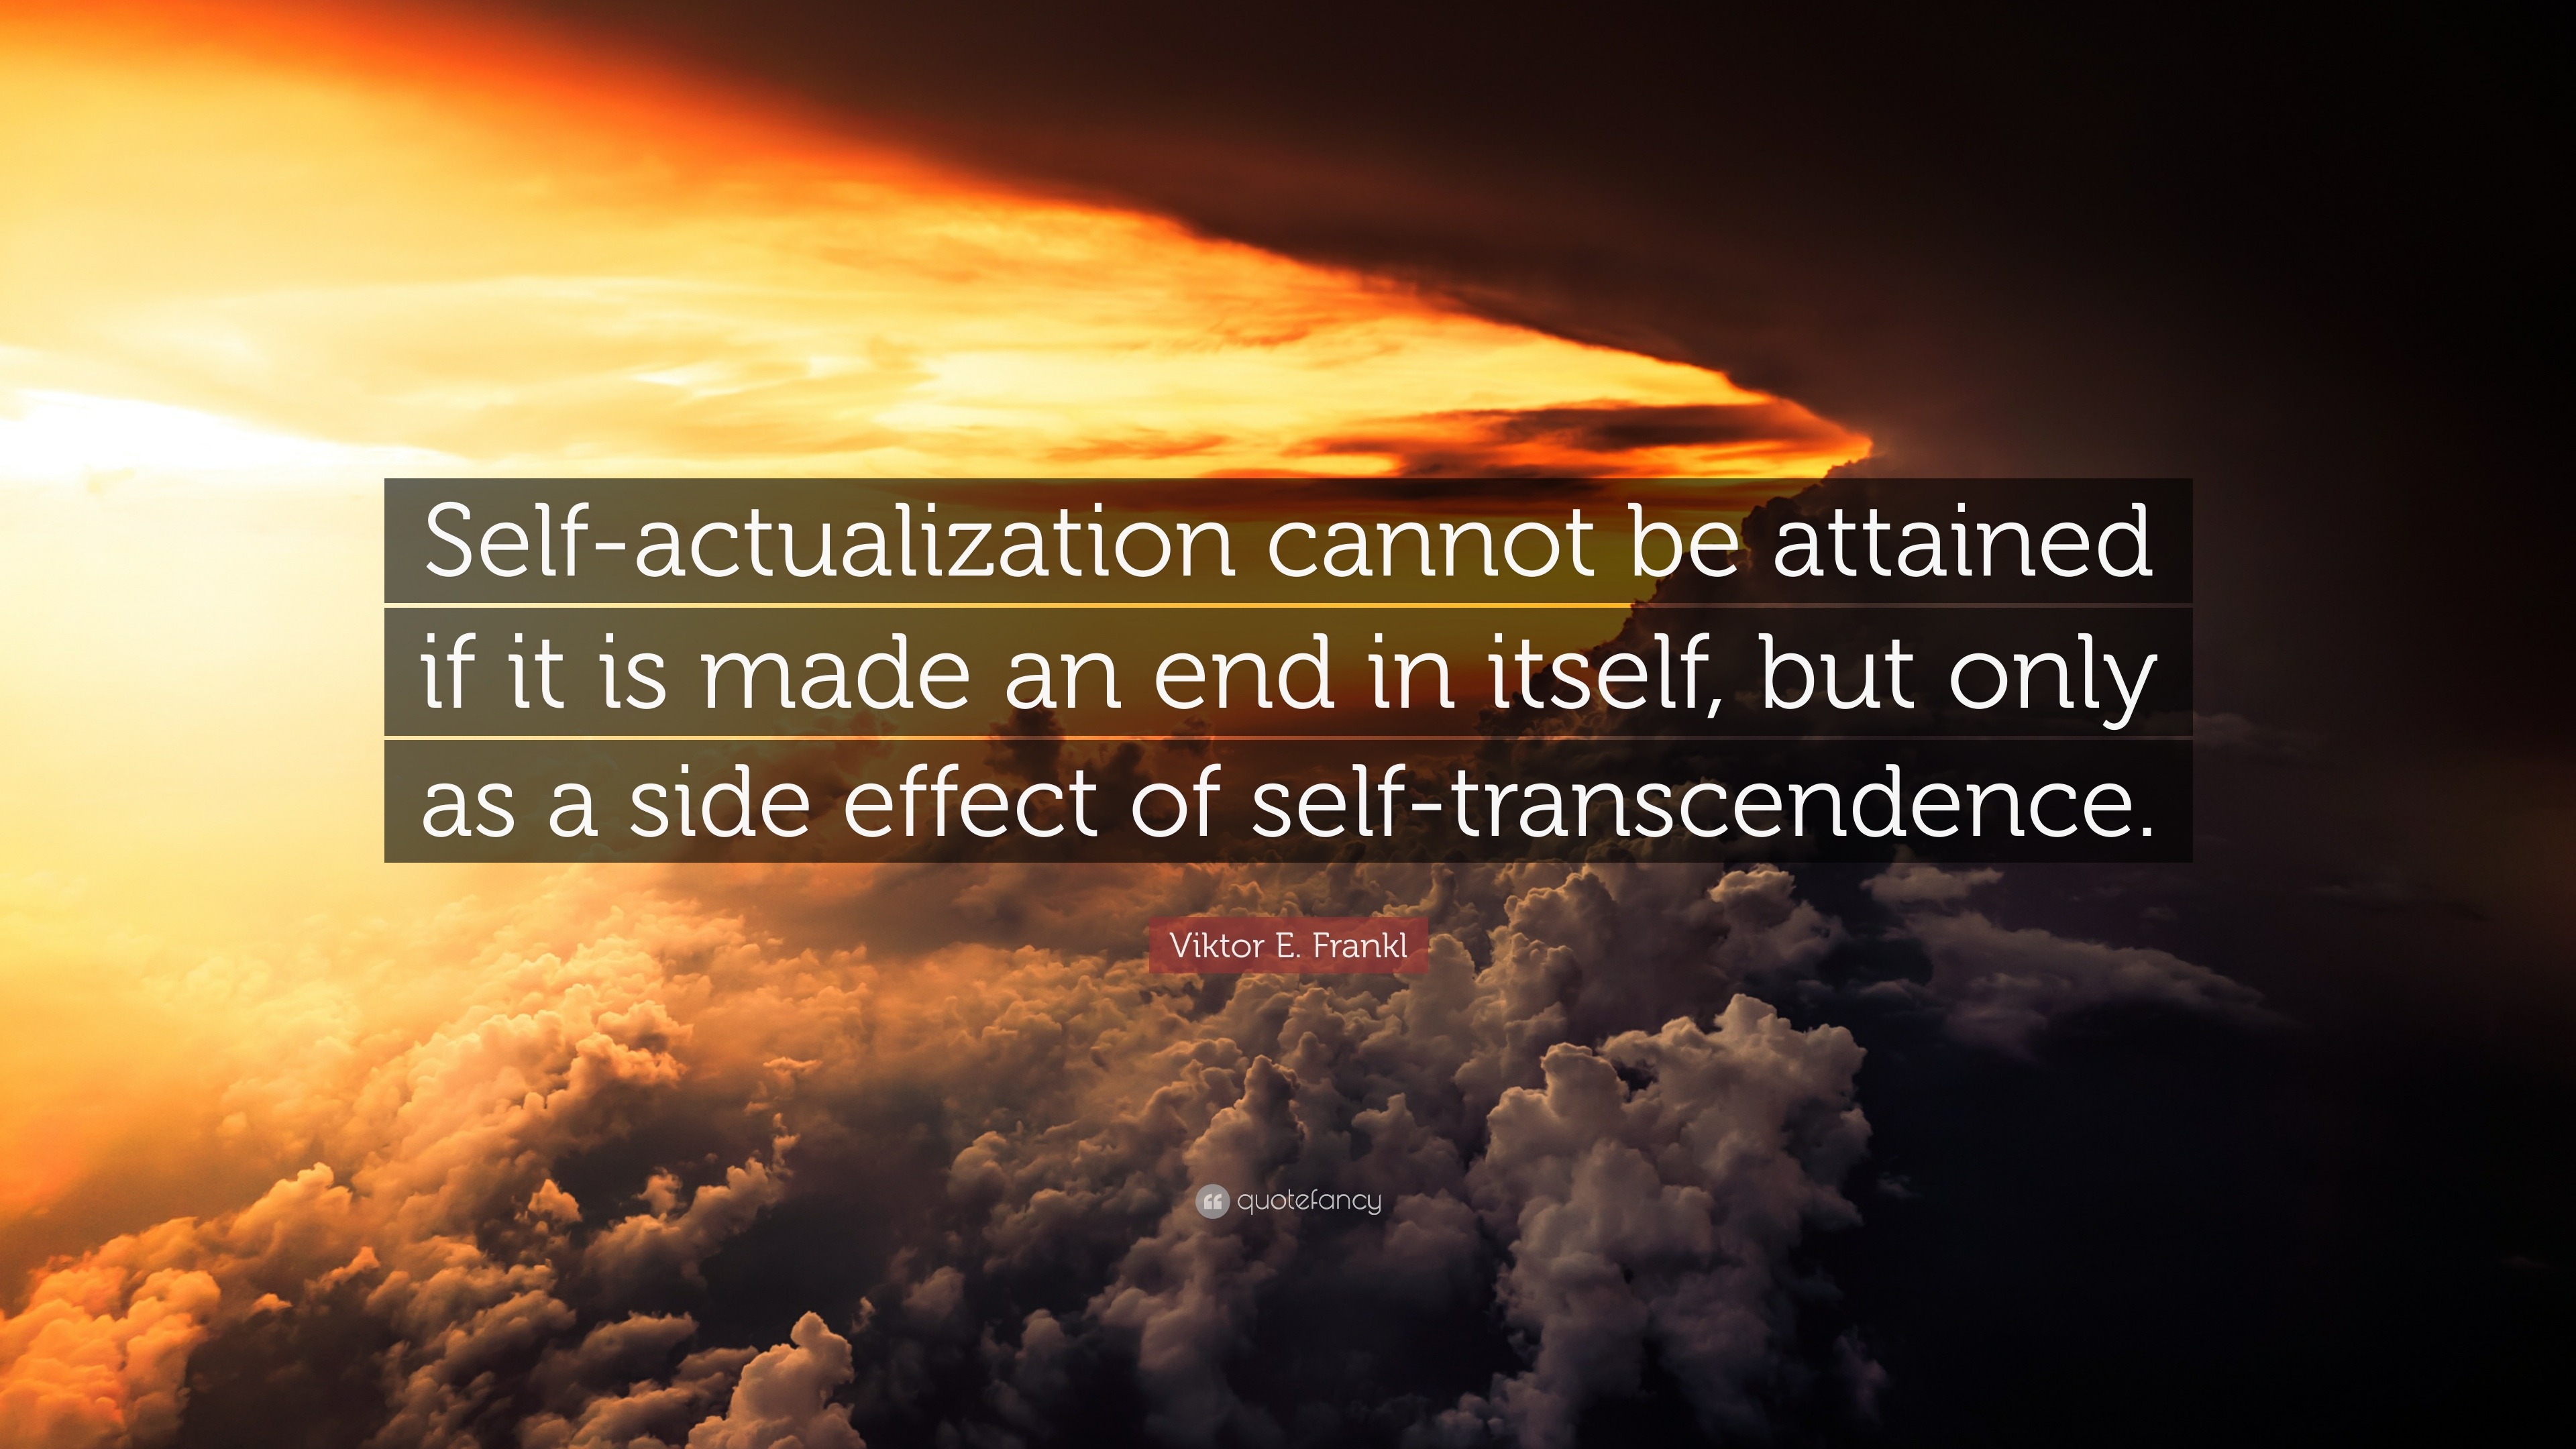 Viktor E. Frankl Quote: “Self-actualization cannot be attained if it is